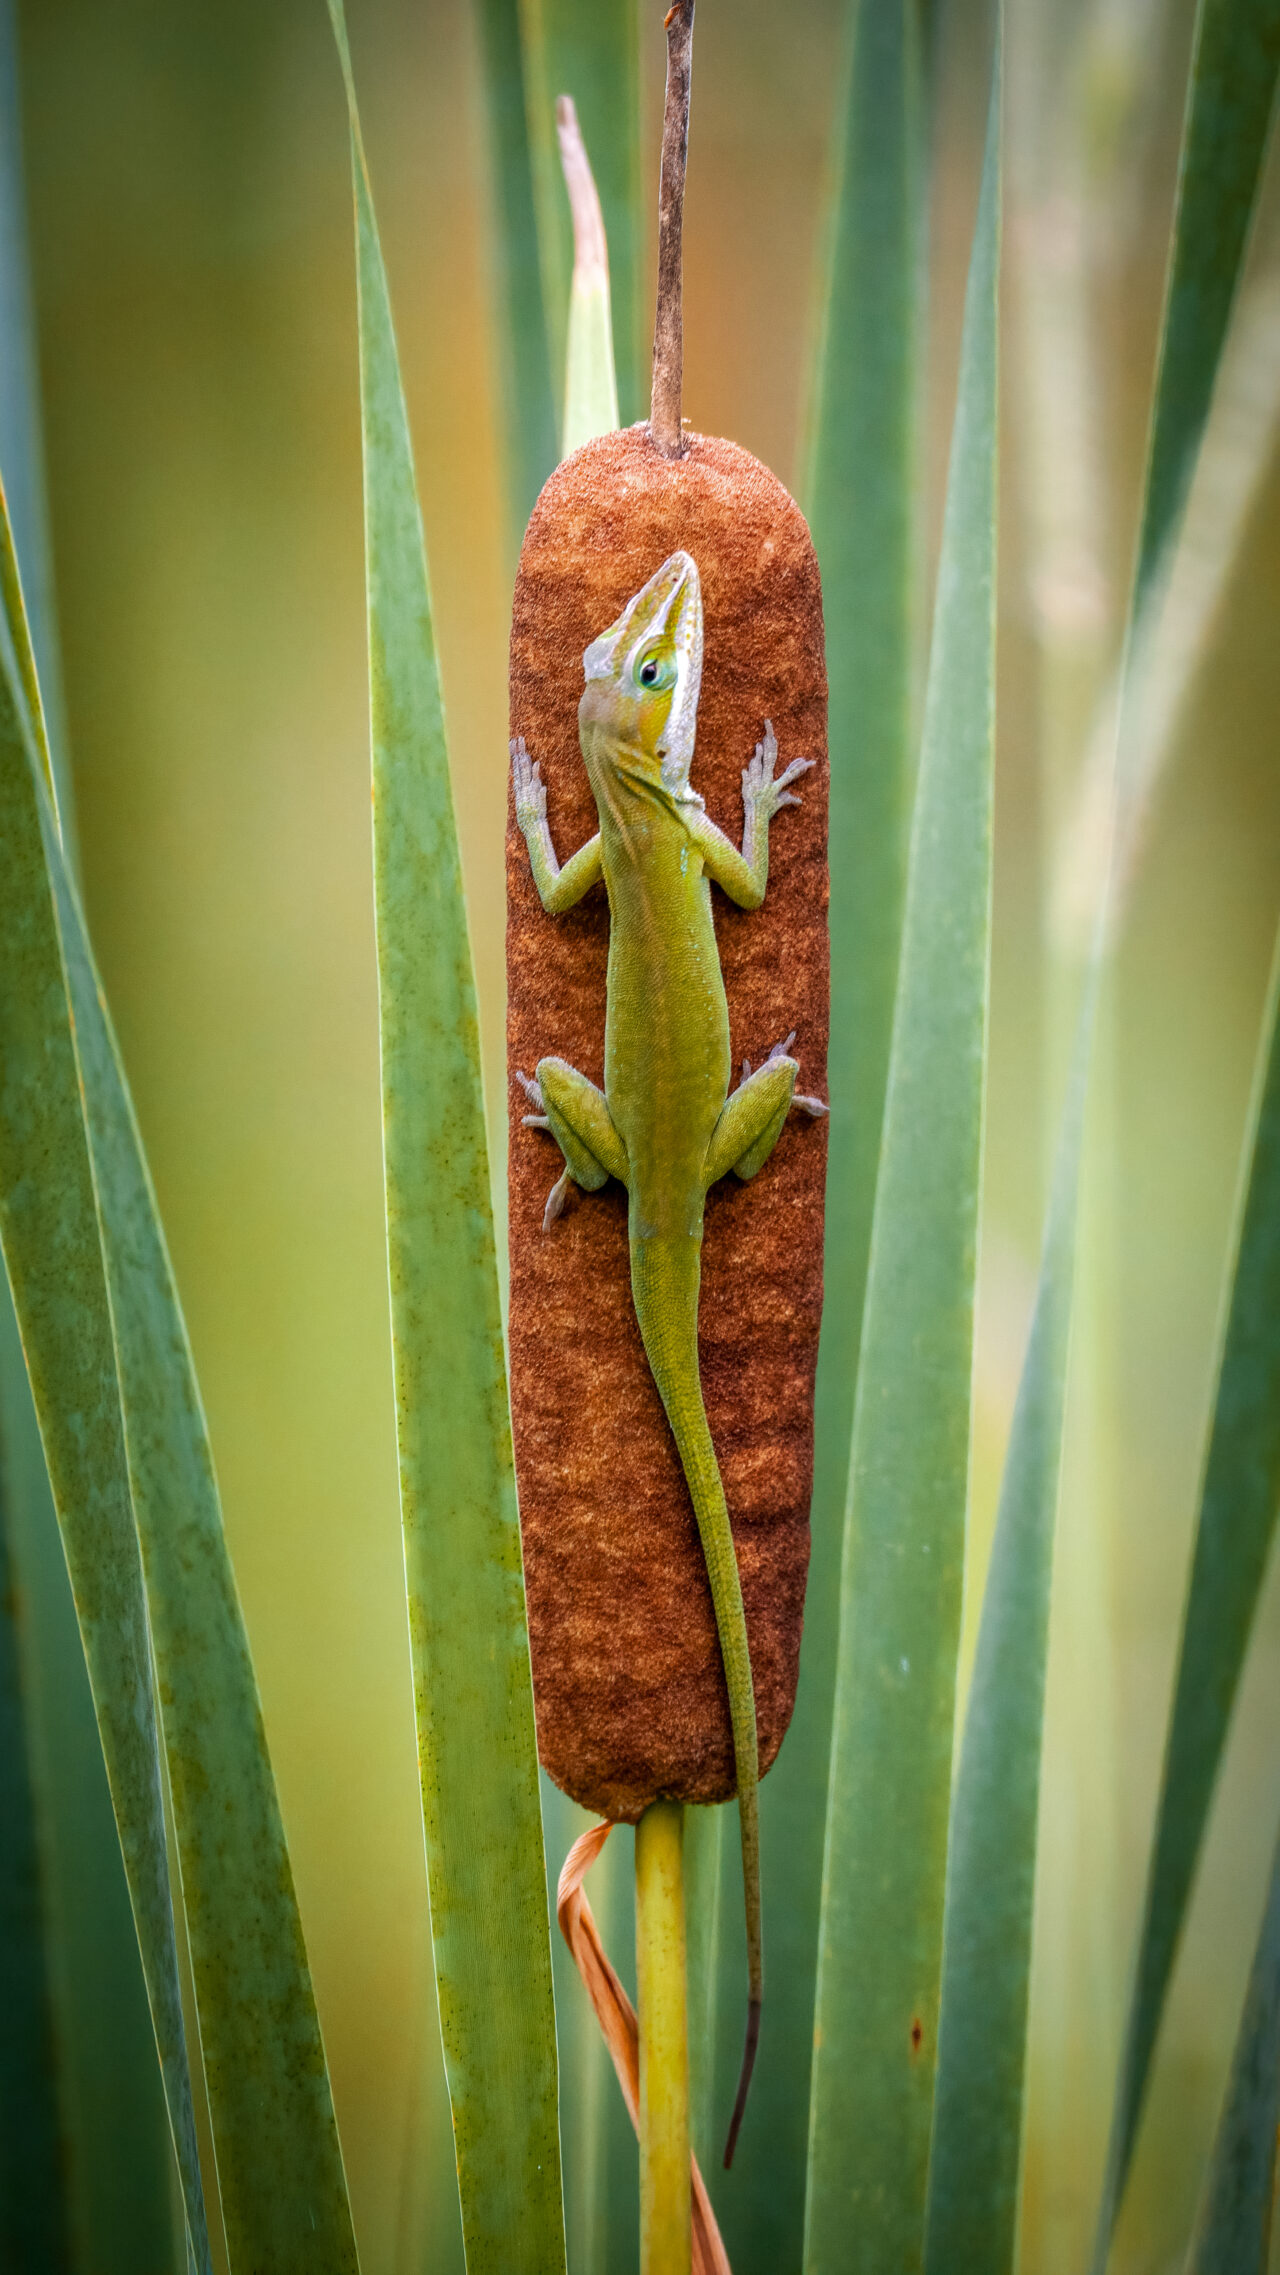 “Anole’s Nine Lives” by Alyssa Hussey